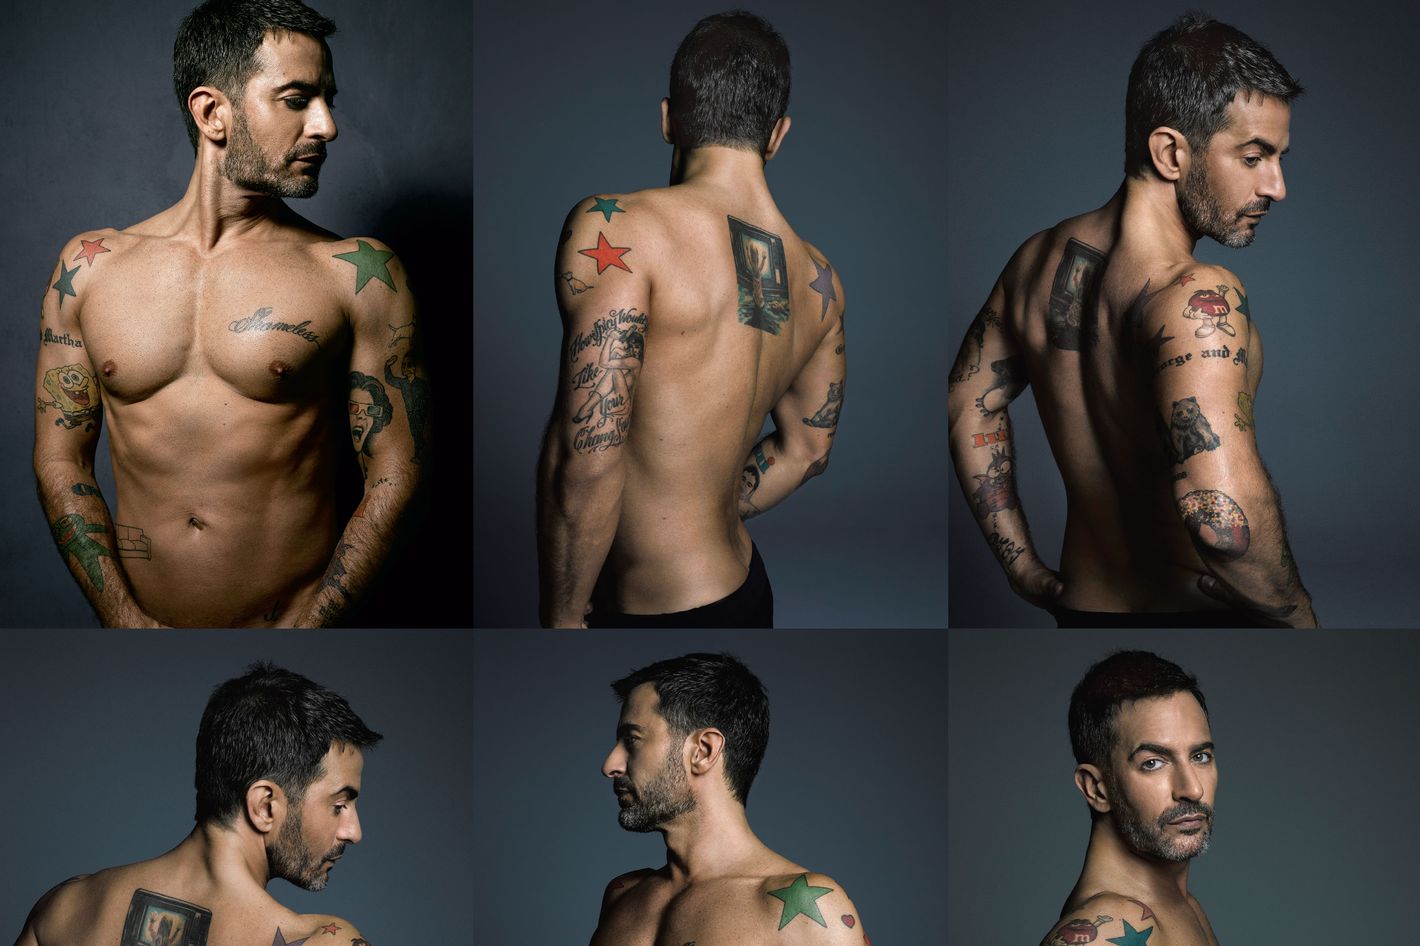 Marc Jacobs on Tattoos in the Fashion Industry